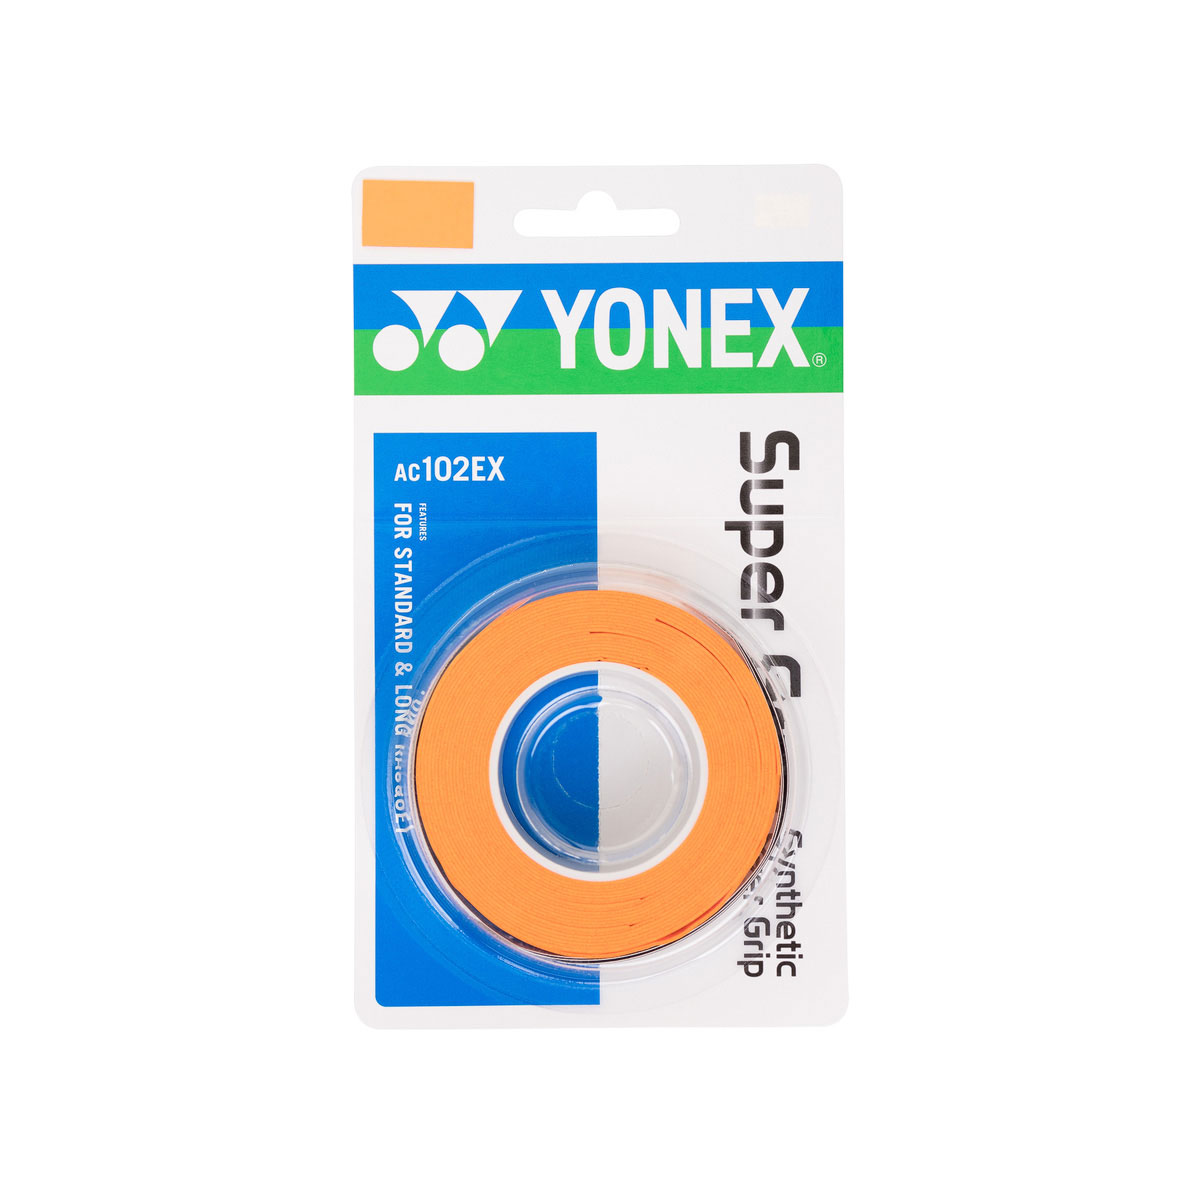 YONEX Super Grap Synthetic Over Grip 3 Stk. - Pink